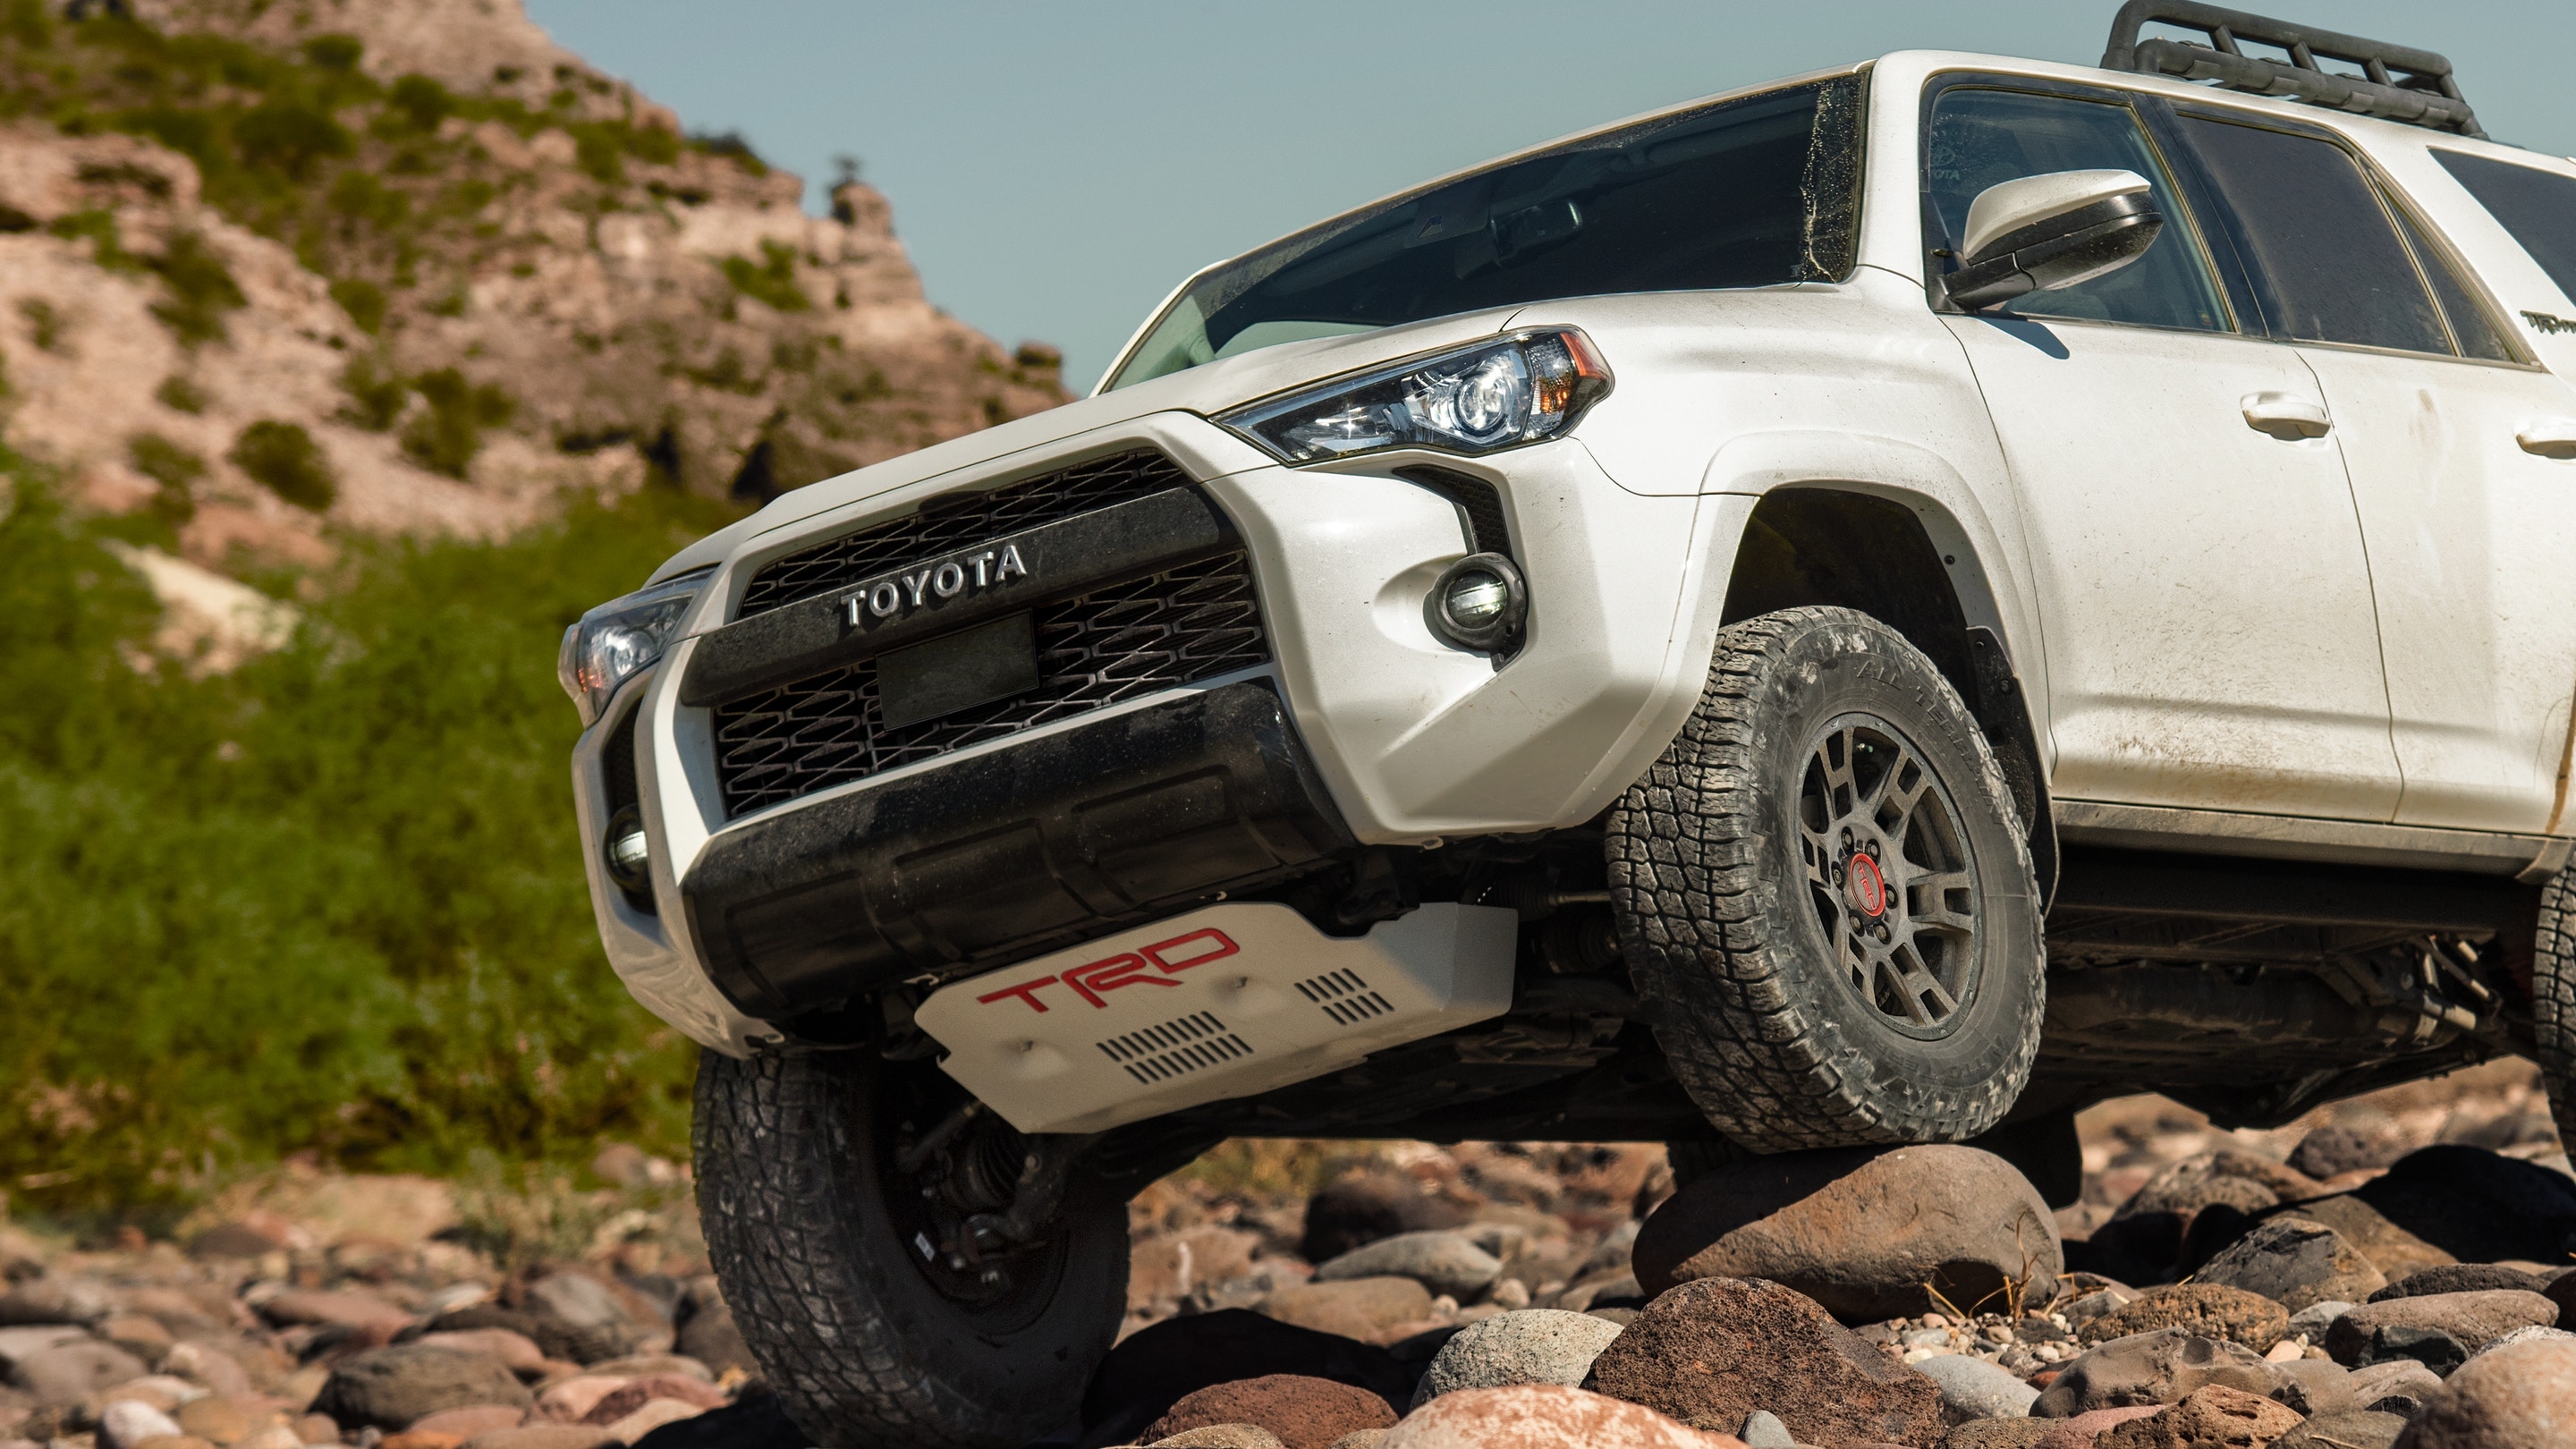 2022 Toyota 4Runner Rugged Design At Courvelle Toyota In Lafayette, LA